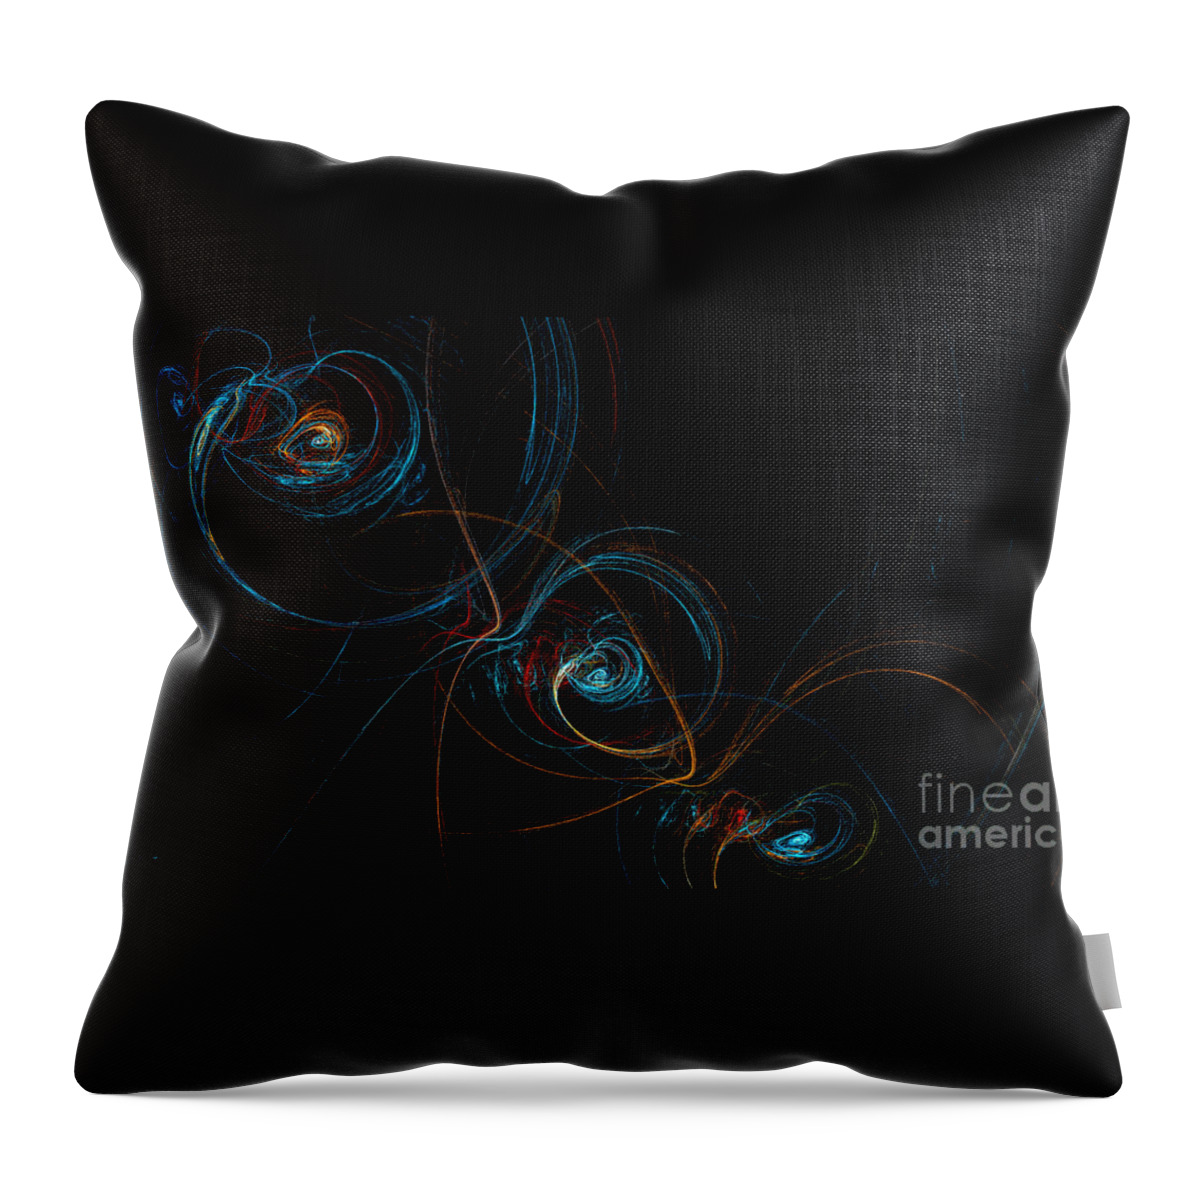 Fractal Throw Pillow featuring the digital art Fractal 8 Whoosh by Alys Caviness-Gober